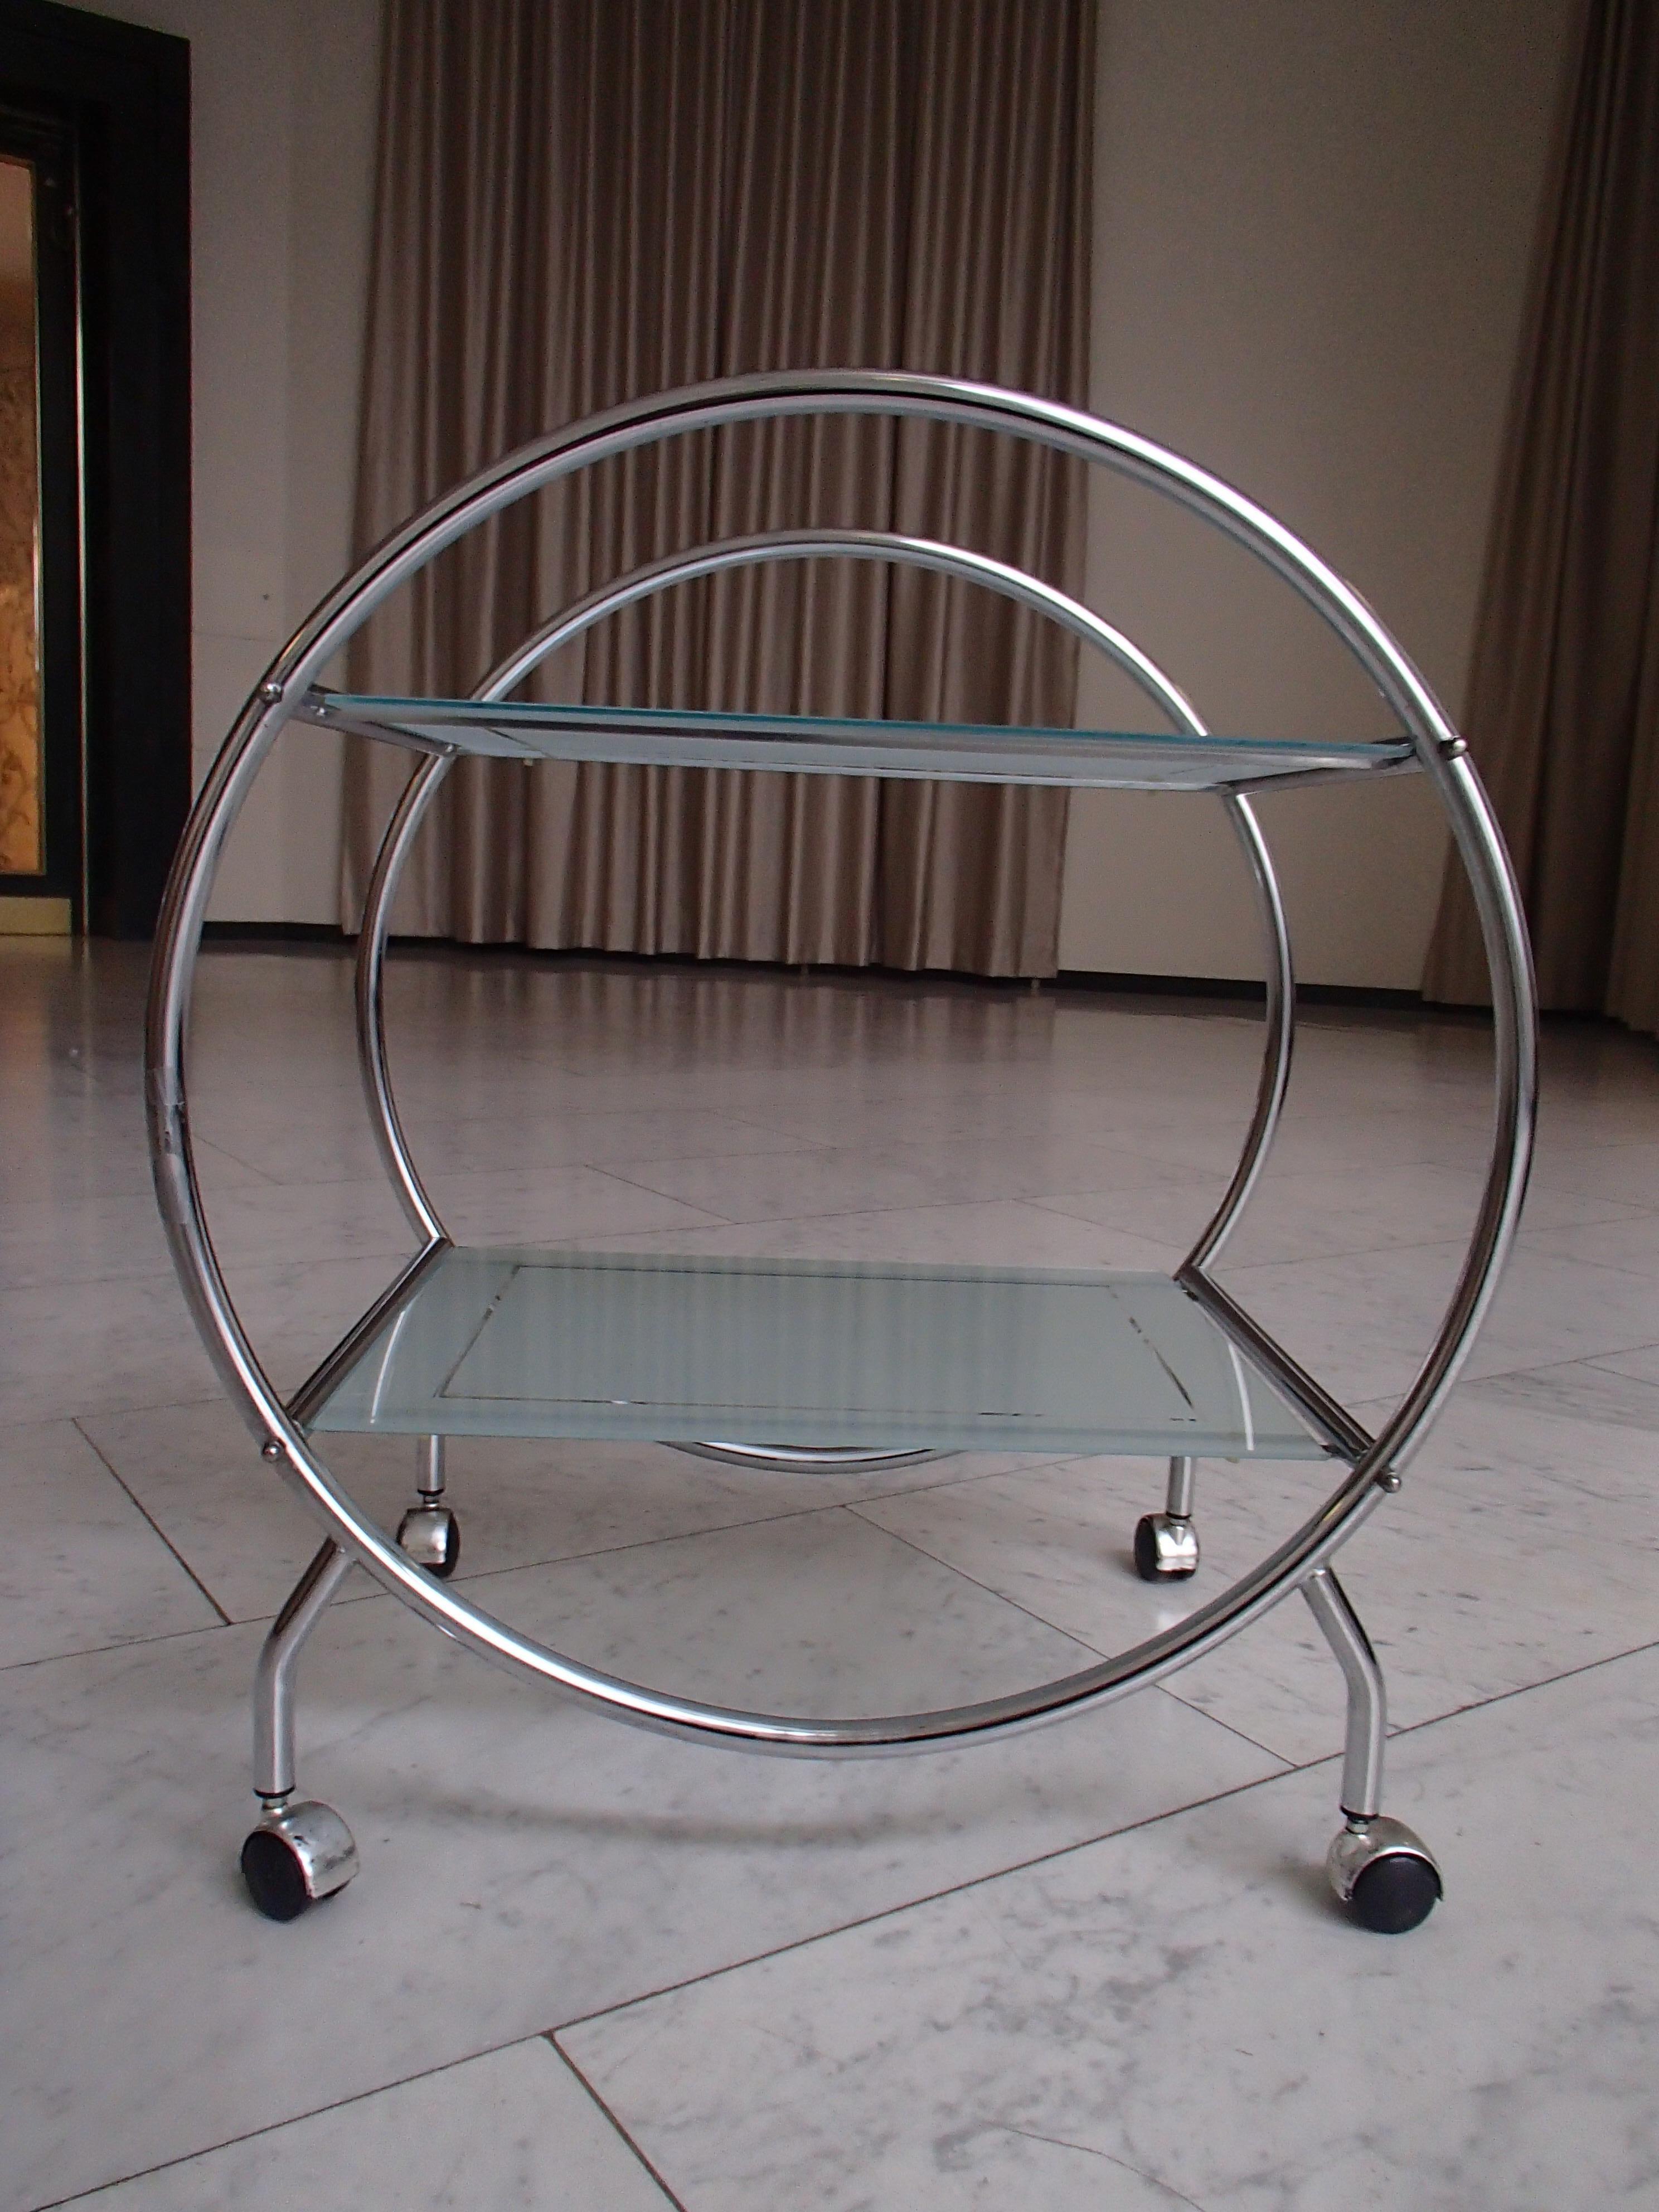 British Round Chrome Art Deco Bar Cart Trolley with 2 Glass Shelves For Sale